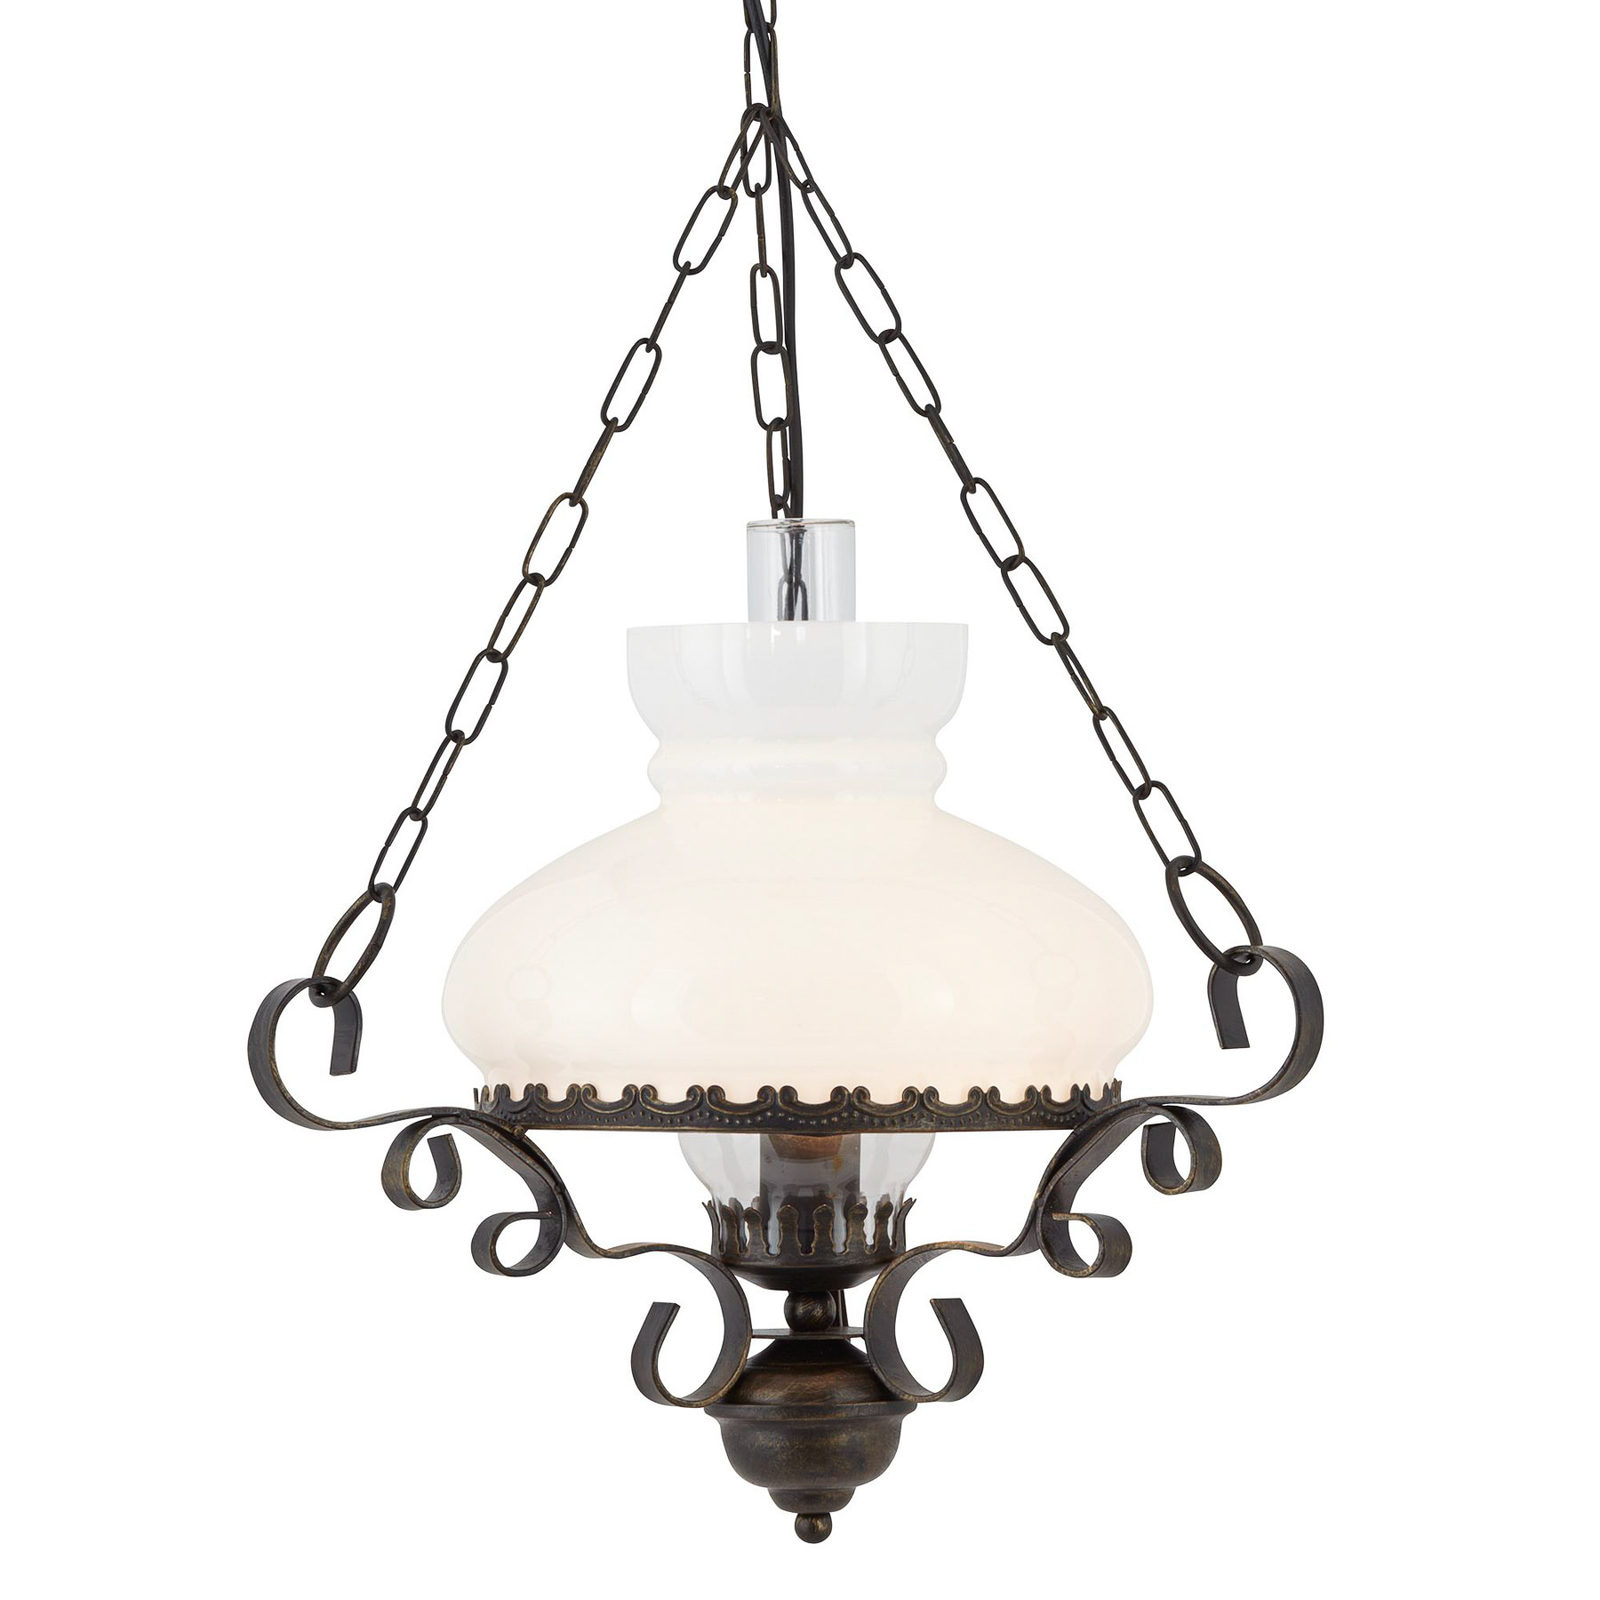 Oil Lantern - hanging lamp with antique charm